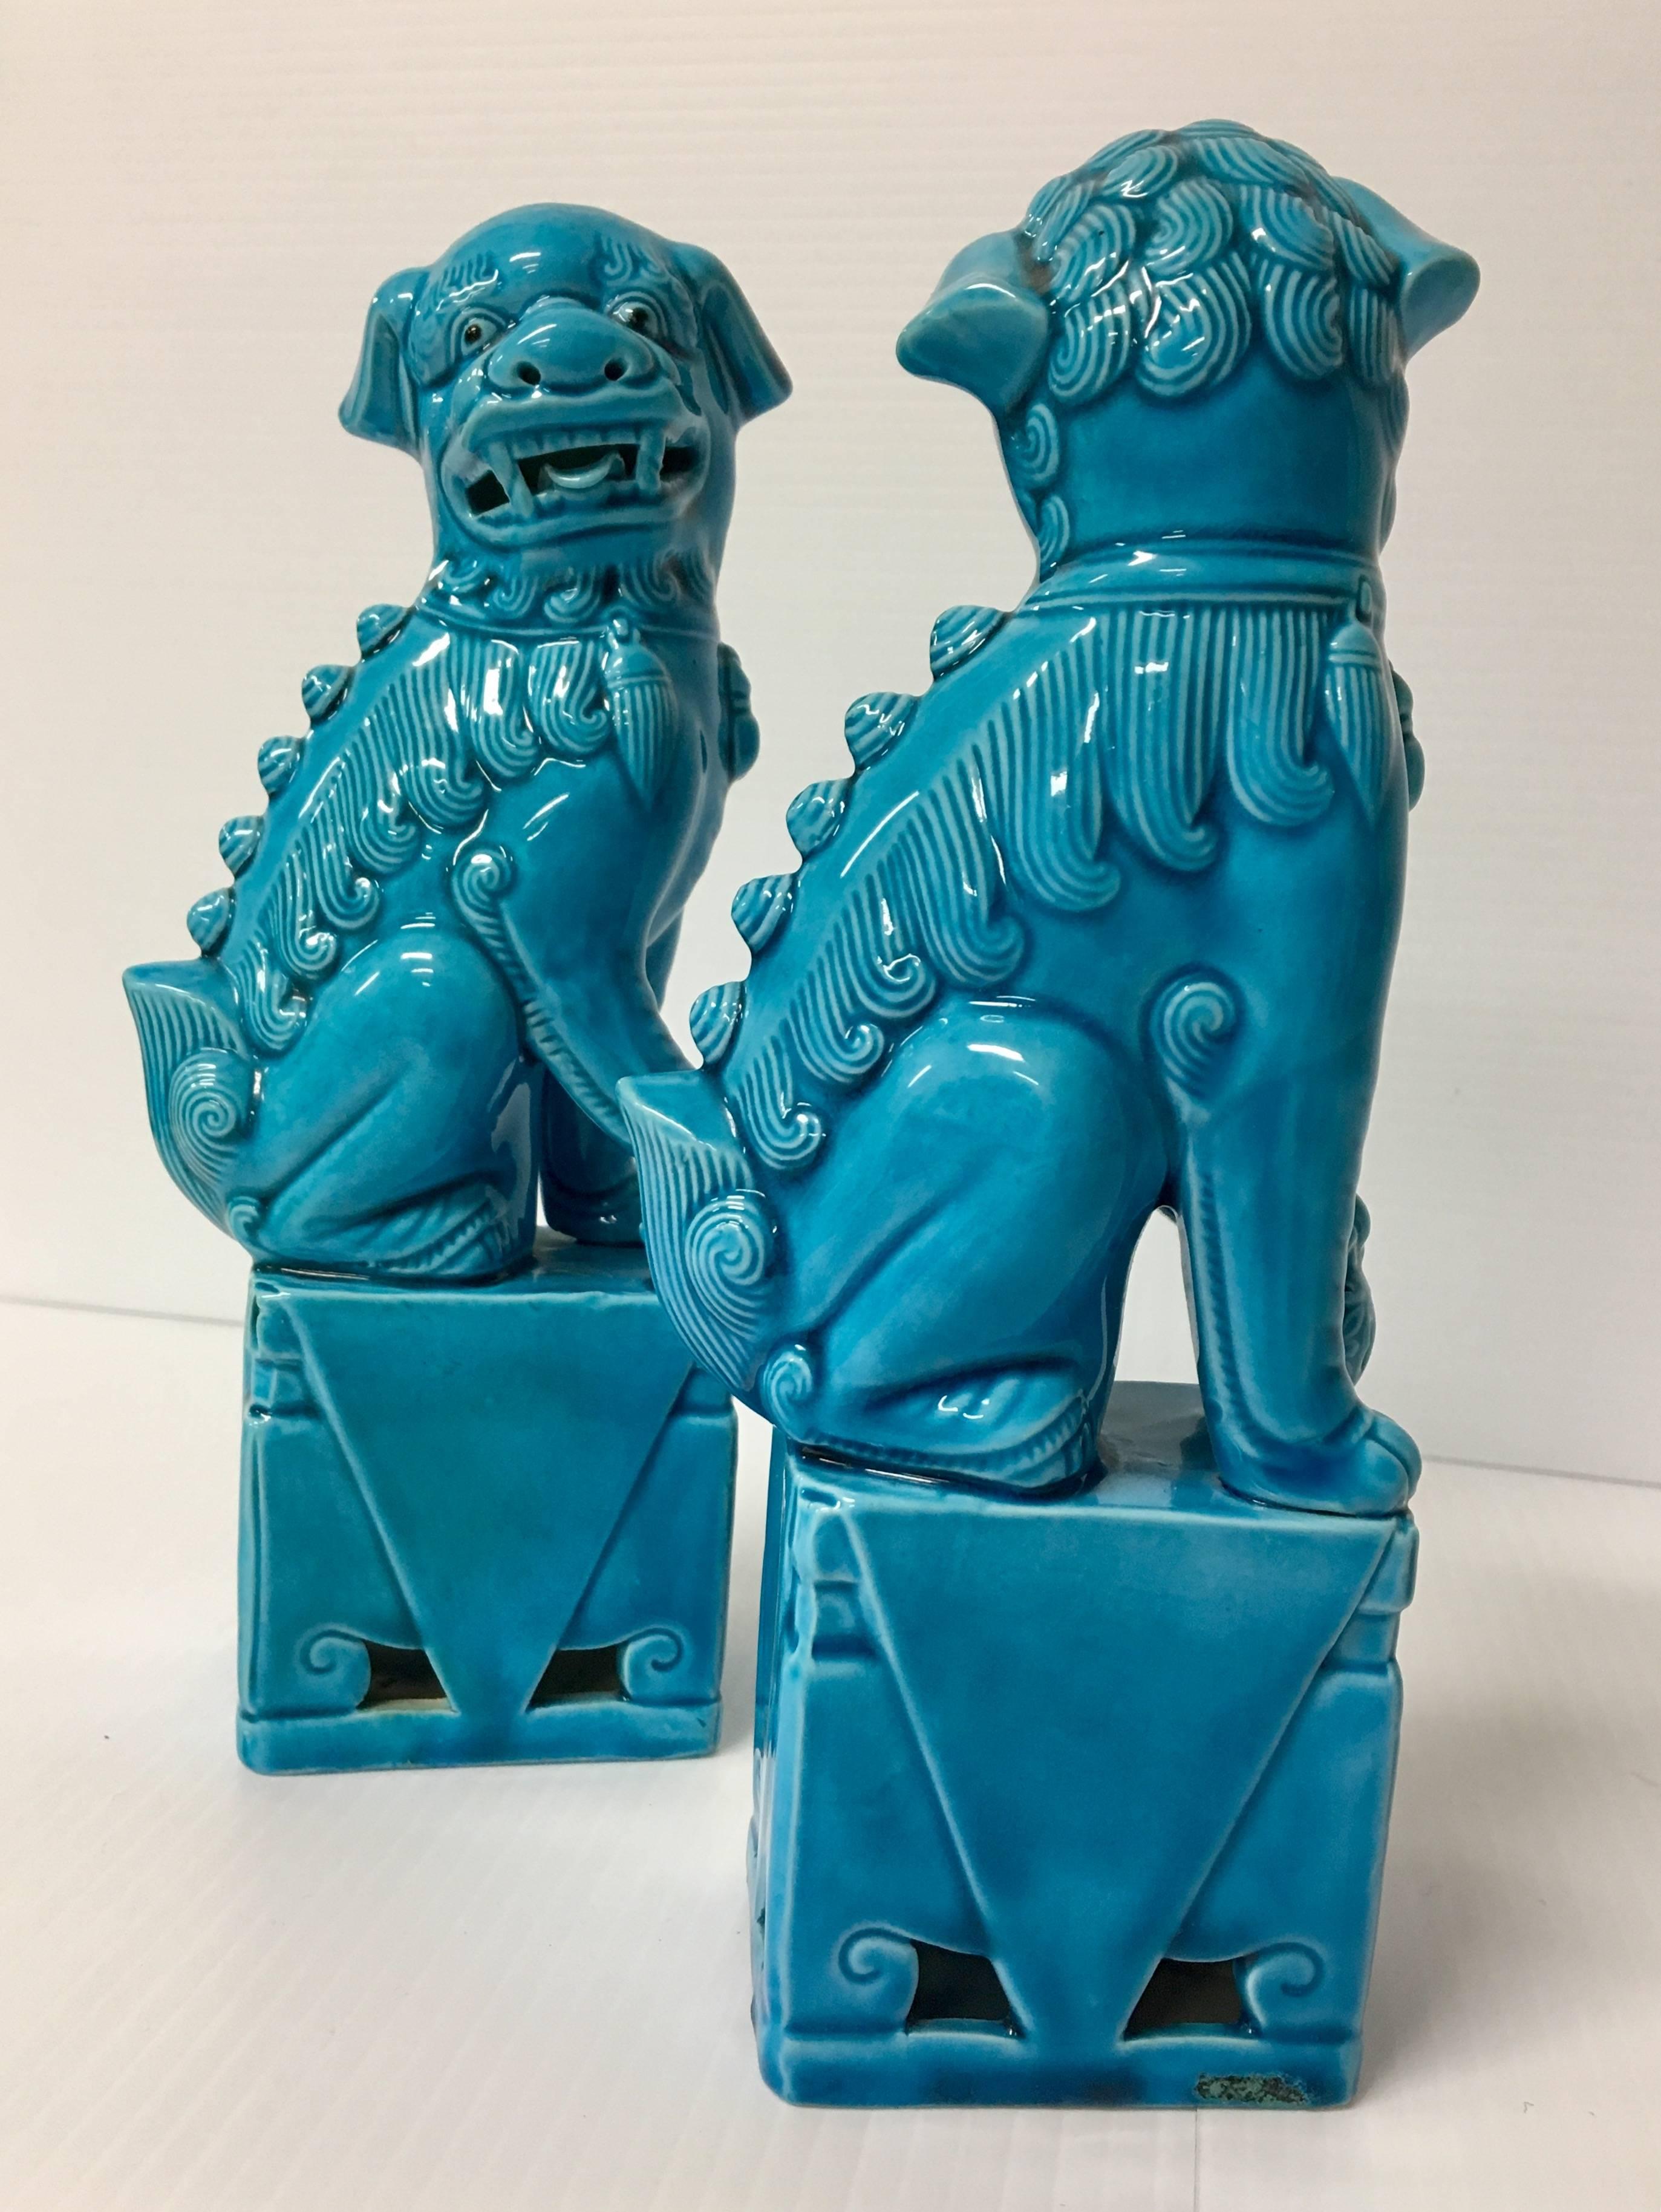 A very nice pair of vintage, turquoise blue, ceramic foo dogs from Japan. Excellent condition and patina; makes a great pair of book ends or a fun decor item in any room!